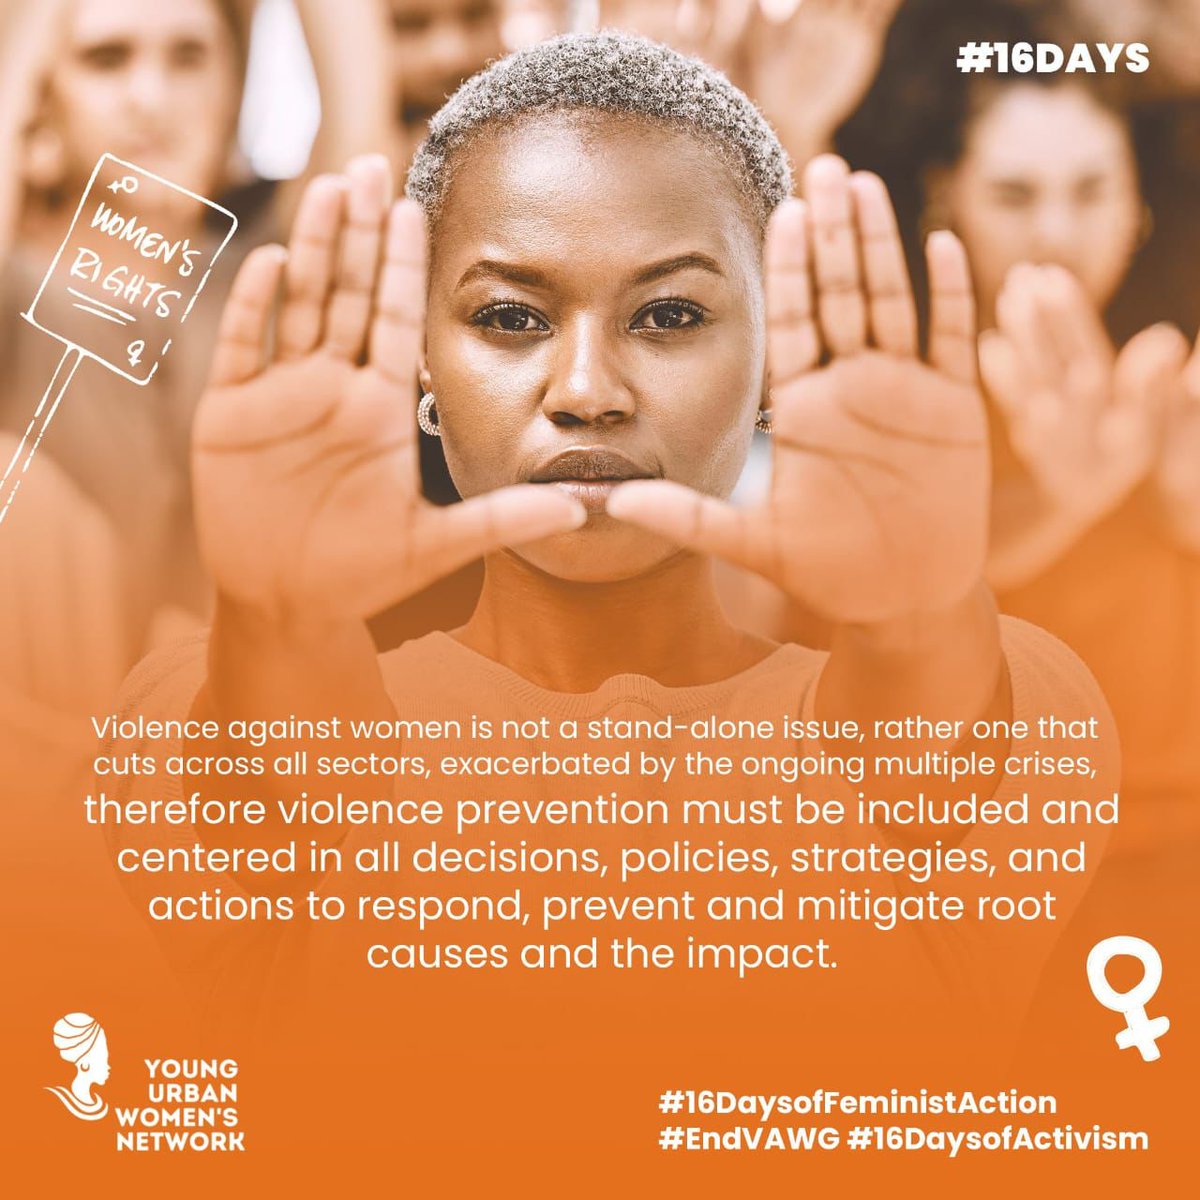 The government of Ghana has trained market women as paralegals to help fight gender-based violence ~Domestic Violence Secretariat Officer #16DaysOfActivismAgainstGBV